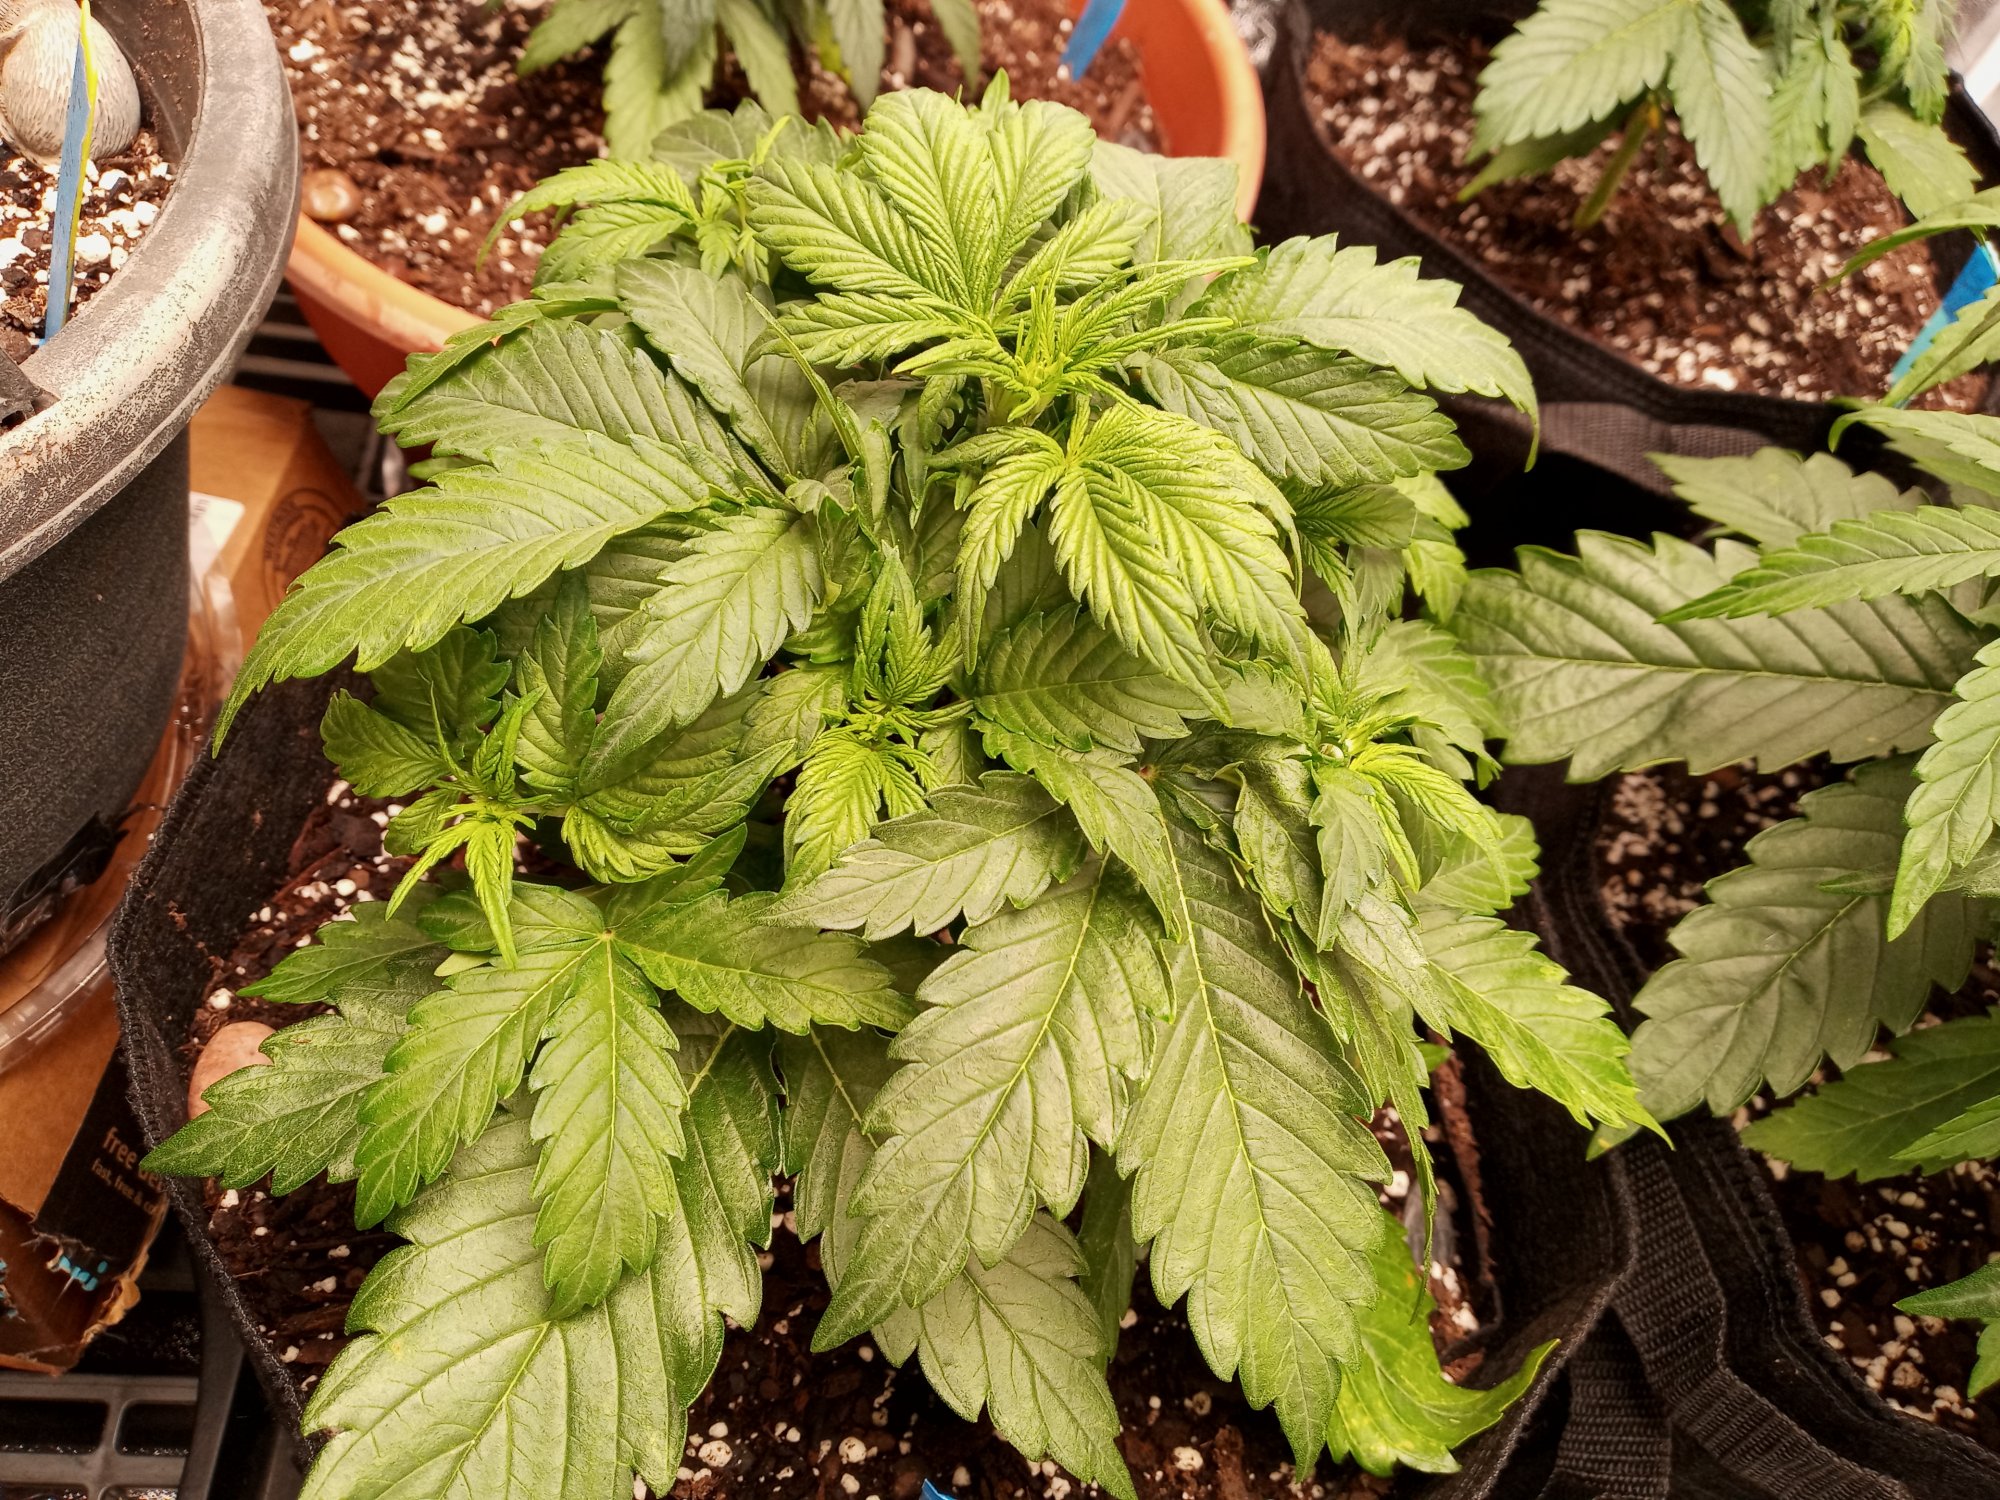 New to autos indoor and dwc trying a lil of each lolhows my grow 2